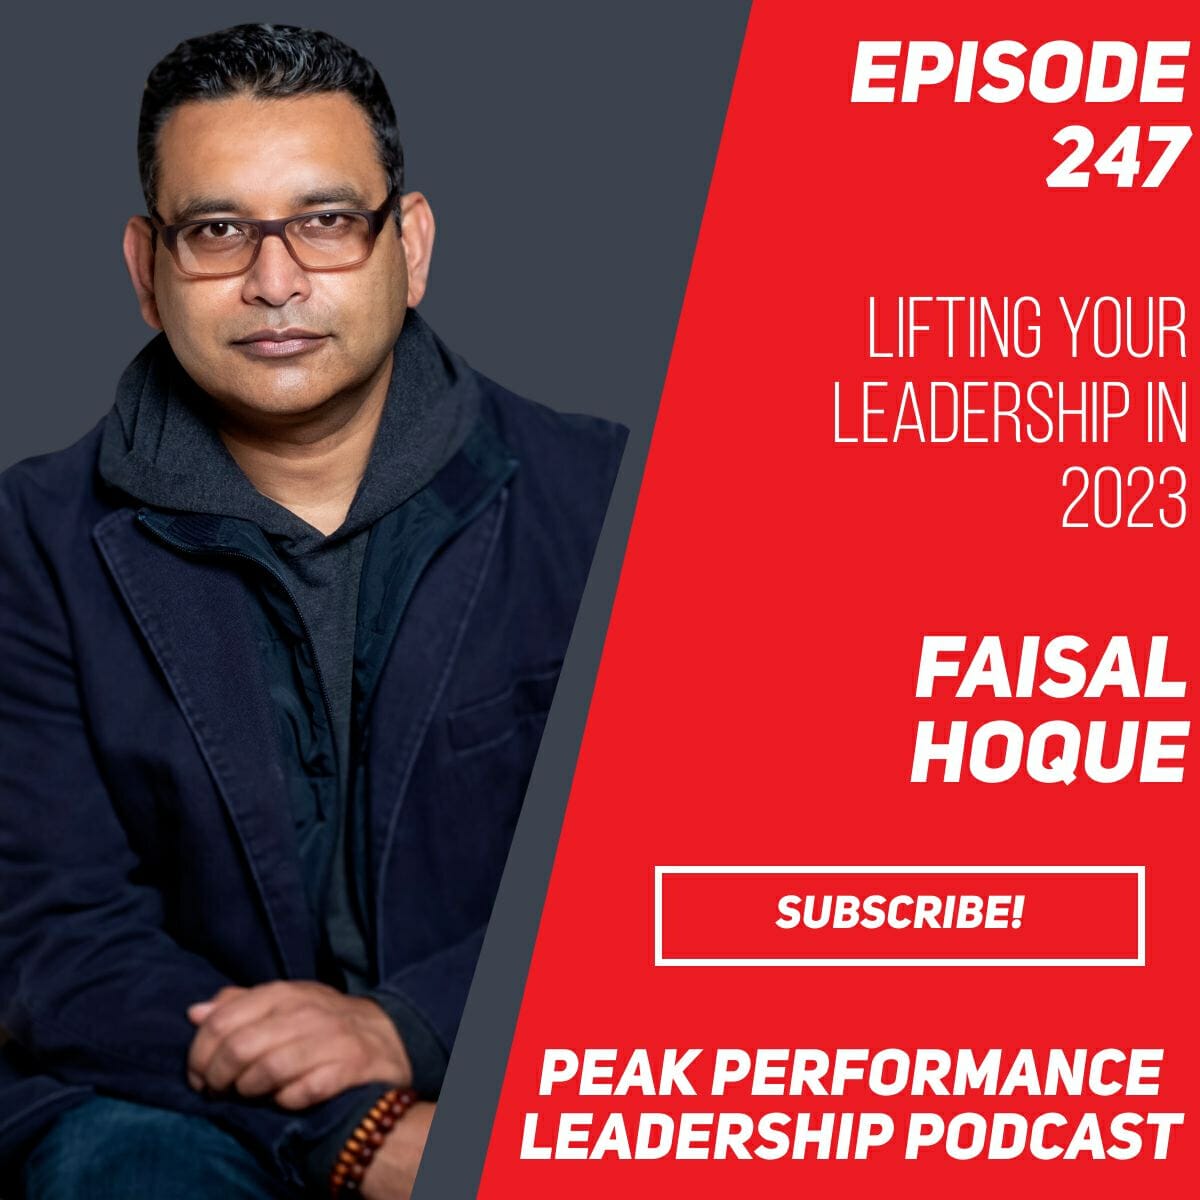 LIFTing your Leadership in 2023 | Faisal Hoque | Episode 247